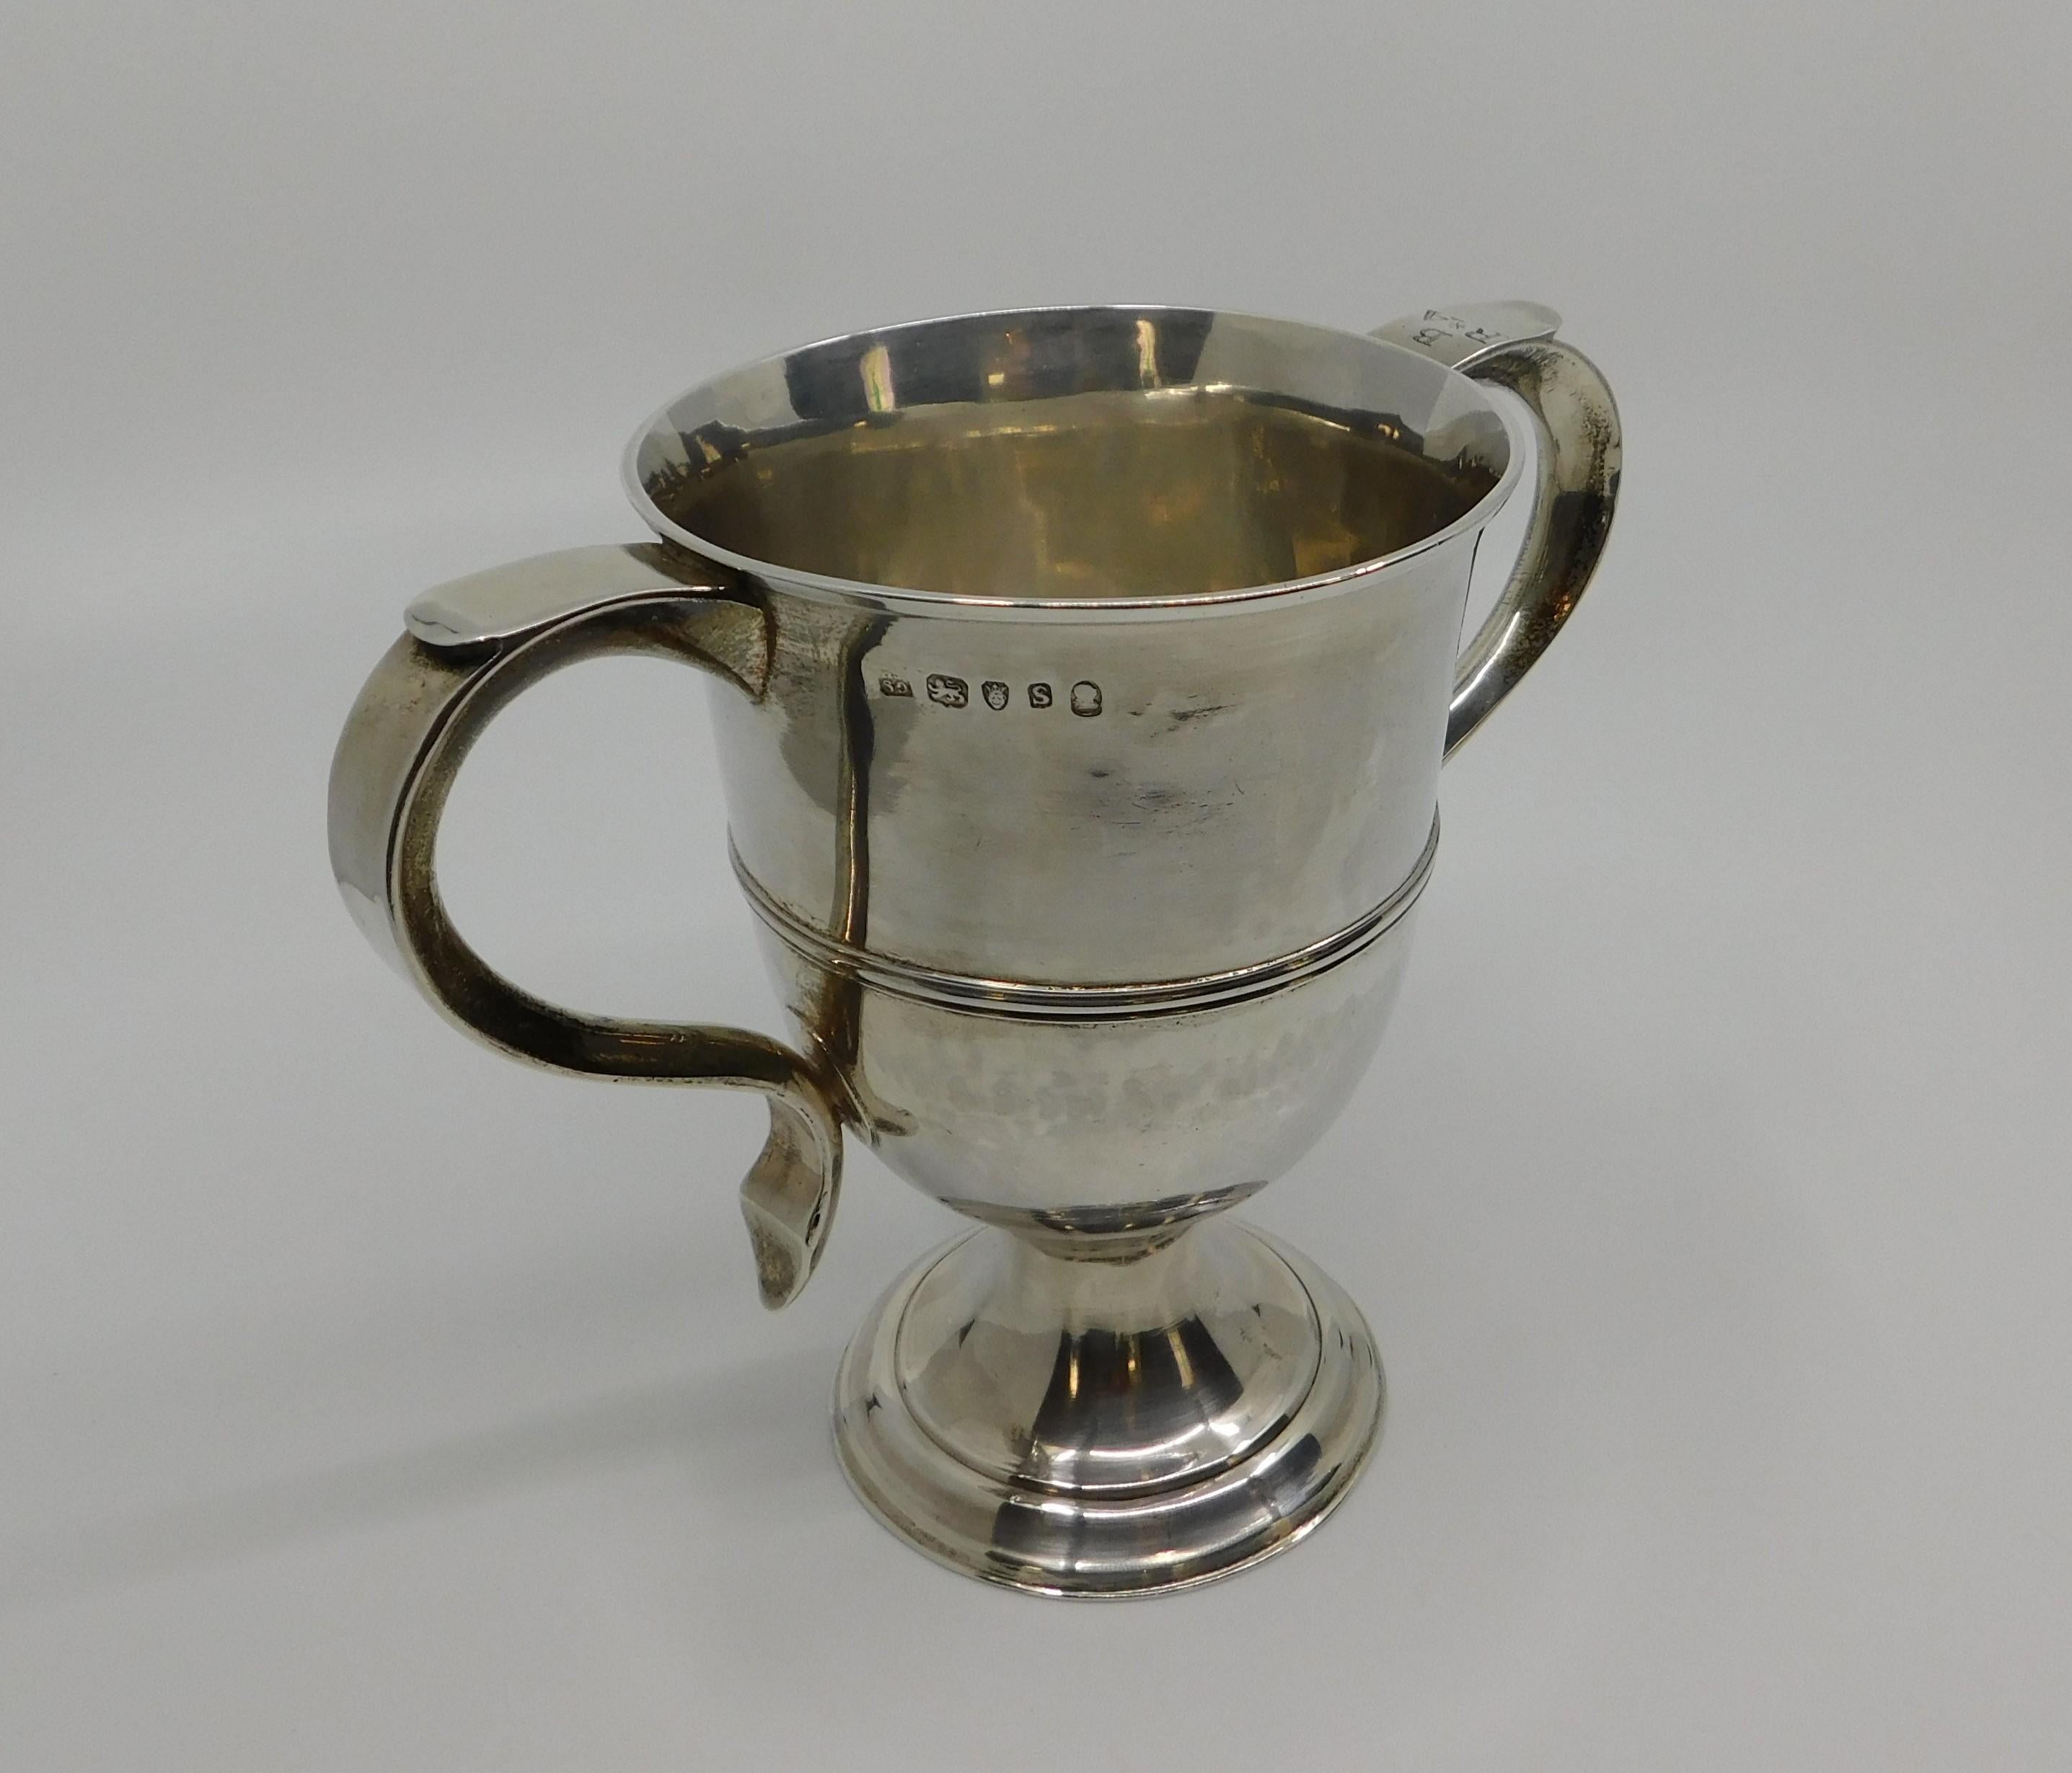 Double handle sterling silver English cup, circa 1813. Unknown maker mark.